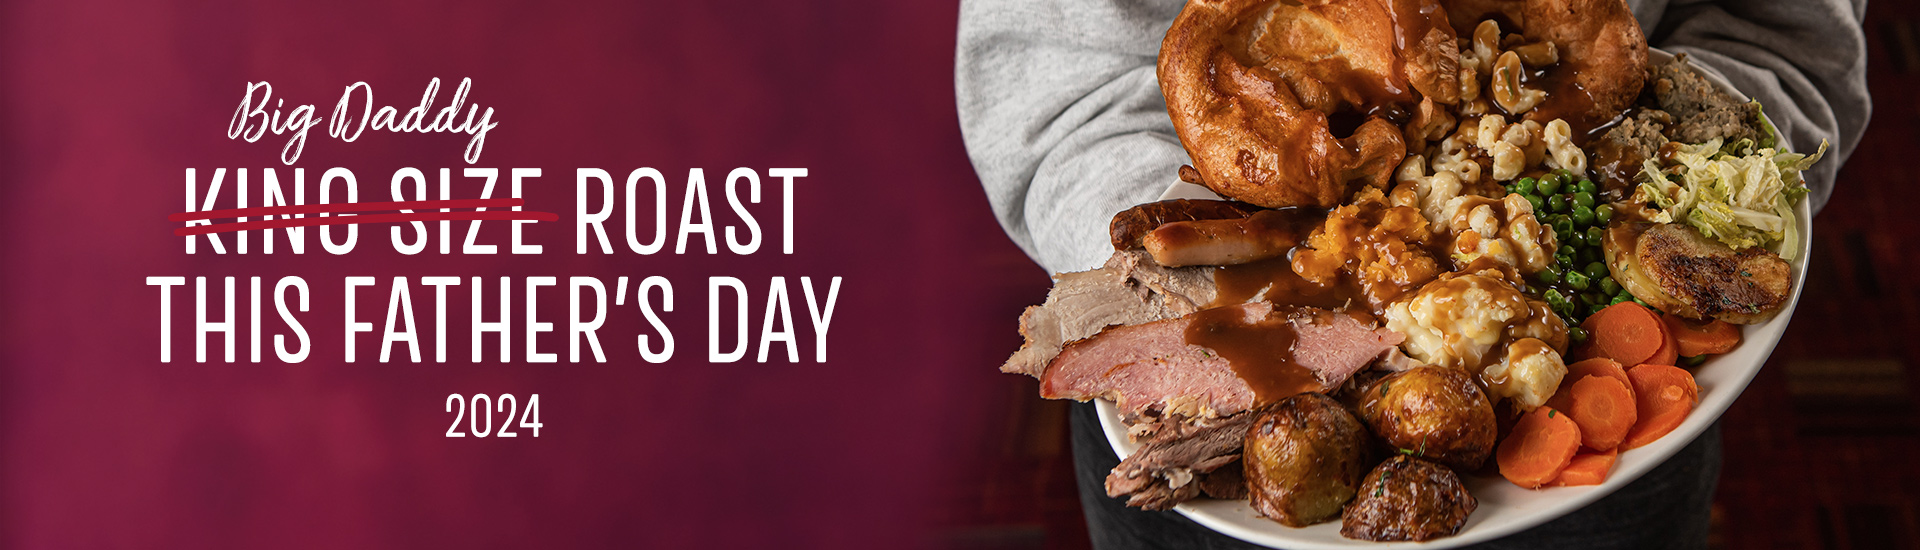 Father’s day carvery in Doncaster, Father’s day at Toby Carvery Bessacarr